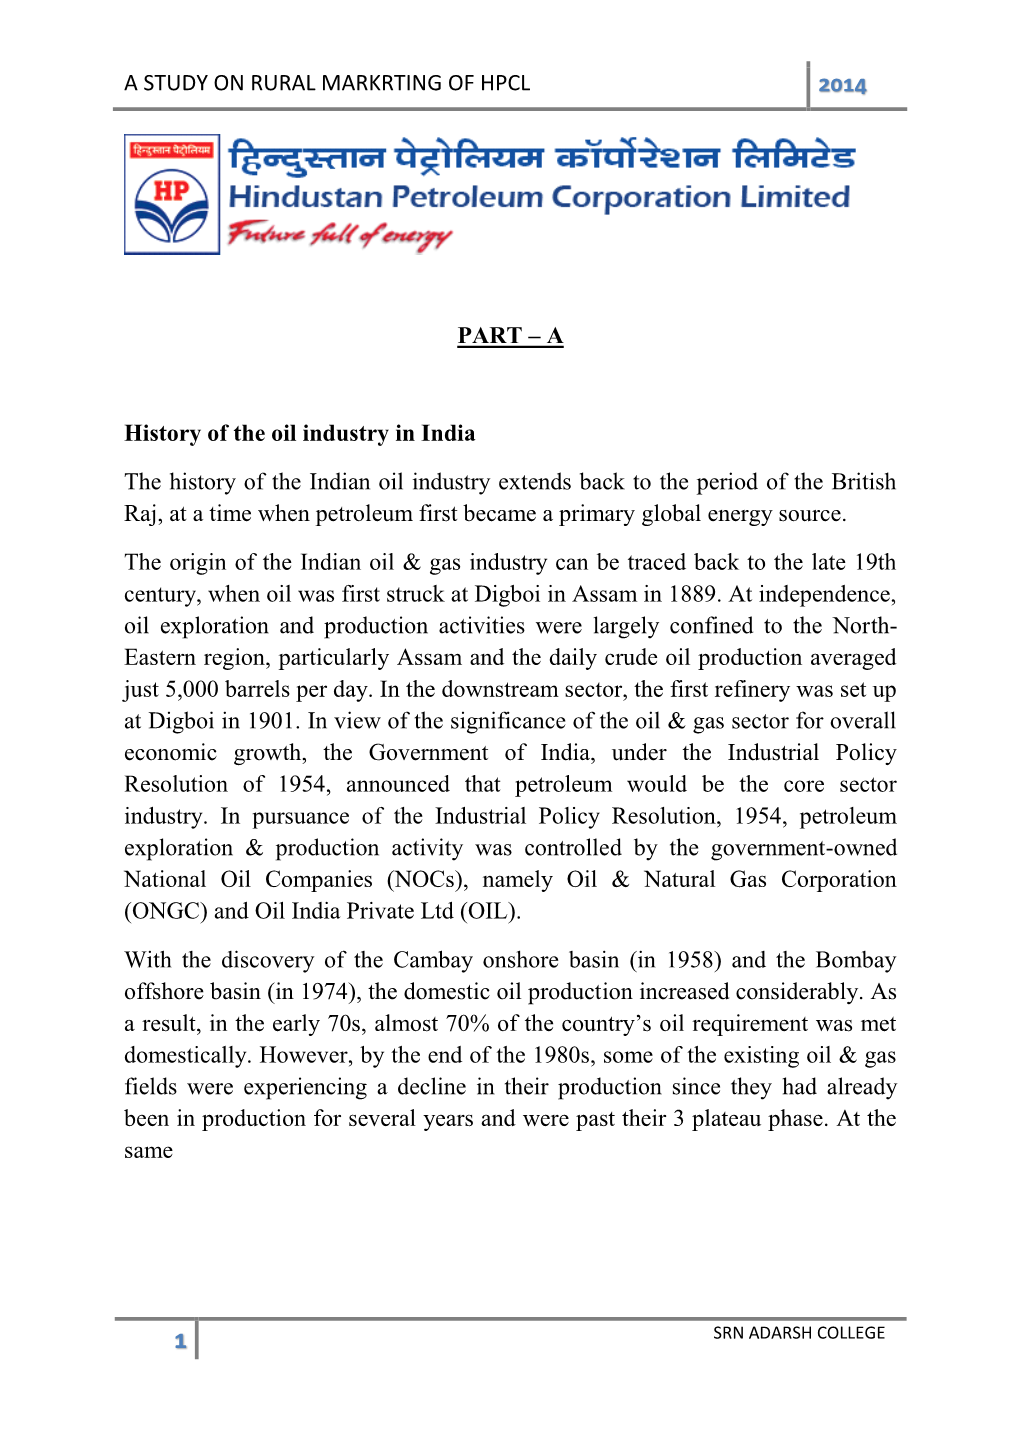 A Study on Rural Markrting of Hpcl 2014